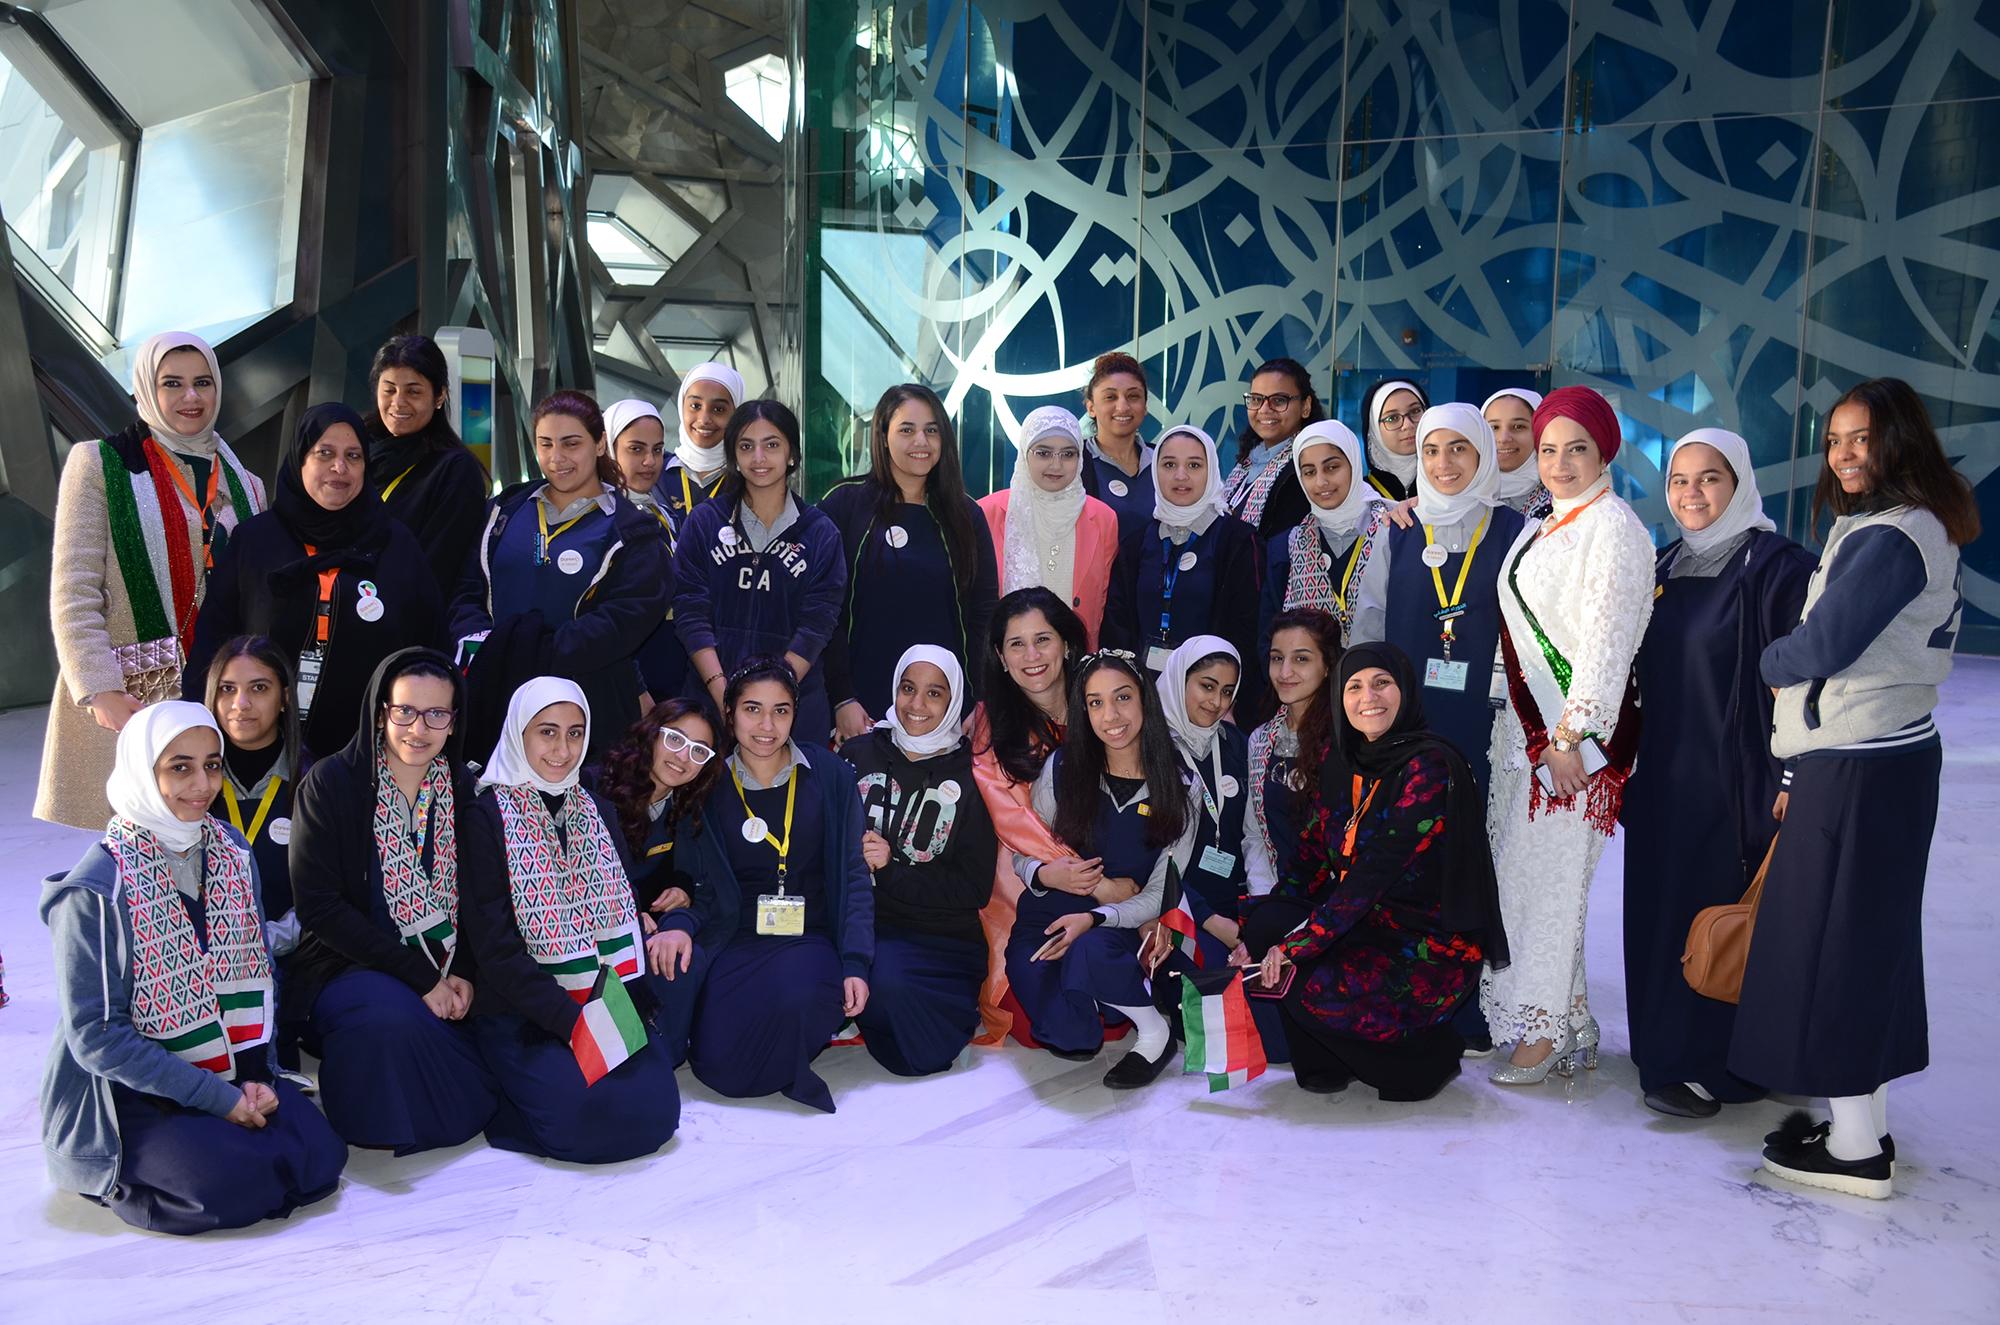 Chairperson of Al-Nuwair Positive Initiative (NPI) Sheikha Intisar Salem Al-Sabah With students